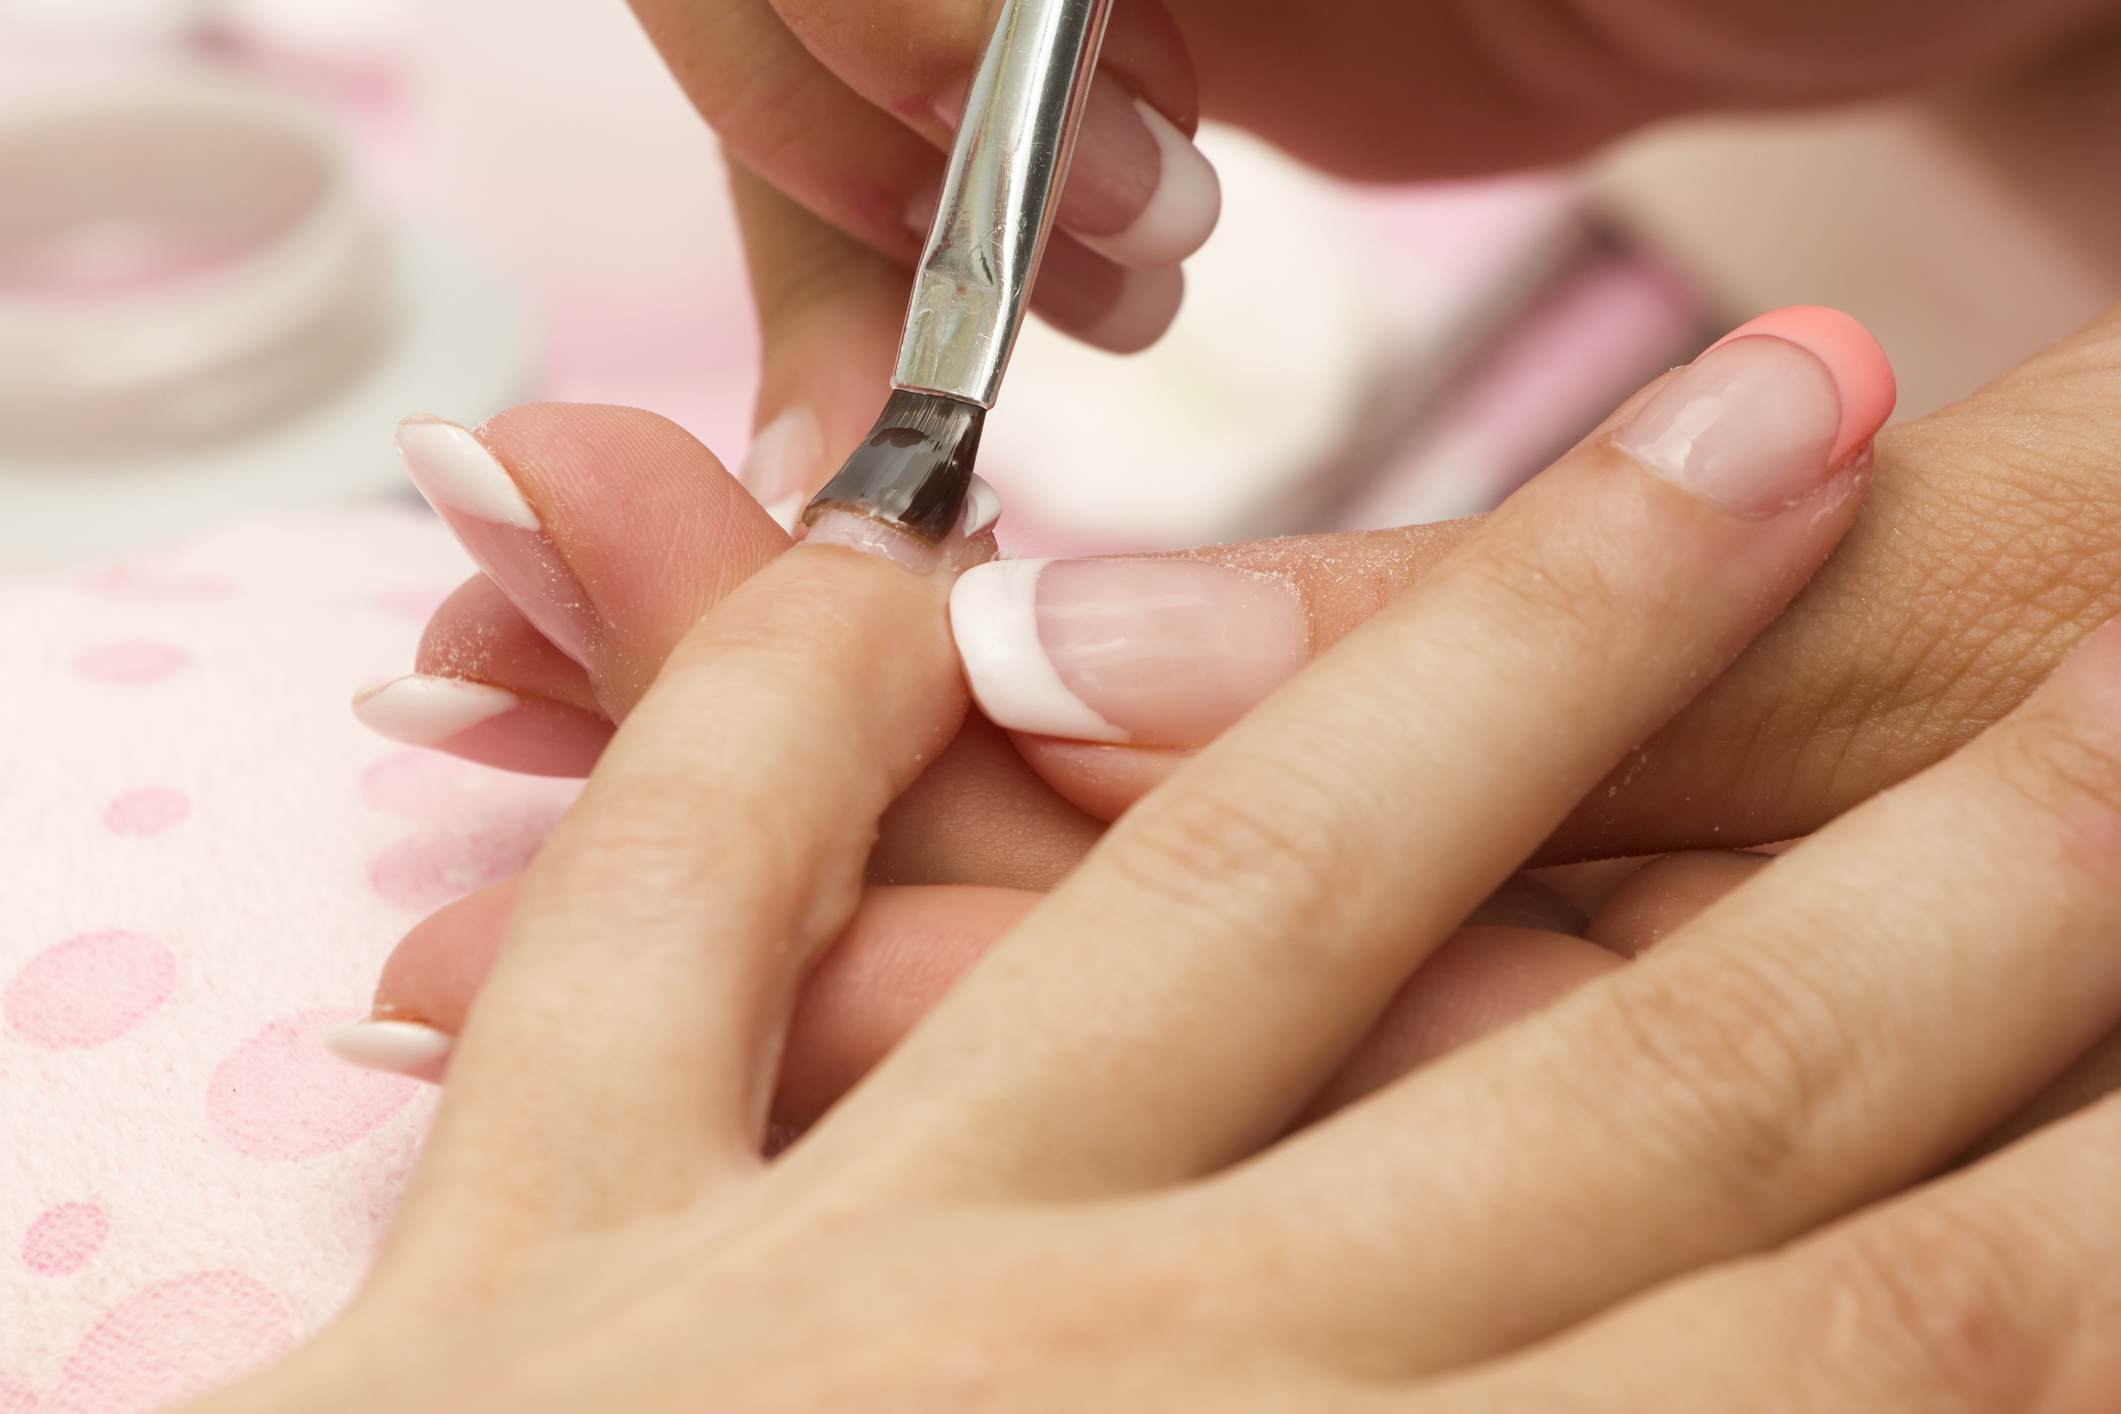 Discover the Ultimate Pampering Experience at Legacy Drive Village's Skyline Nail Spa in Plano